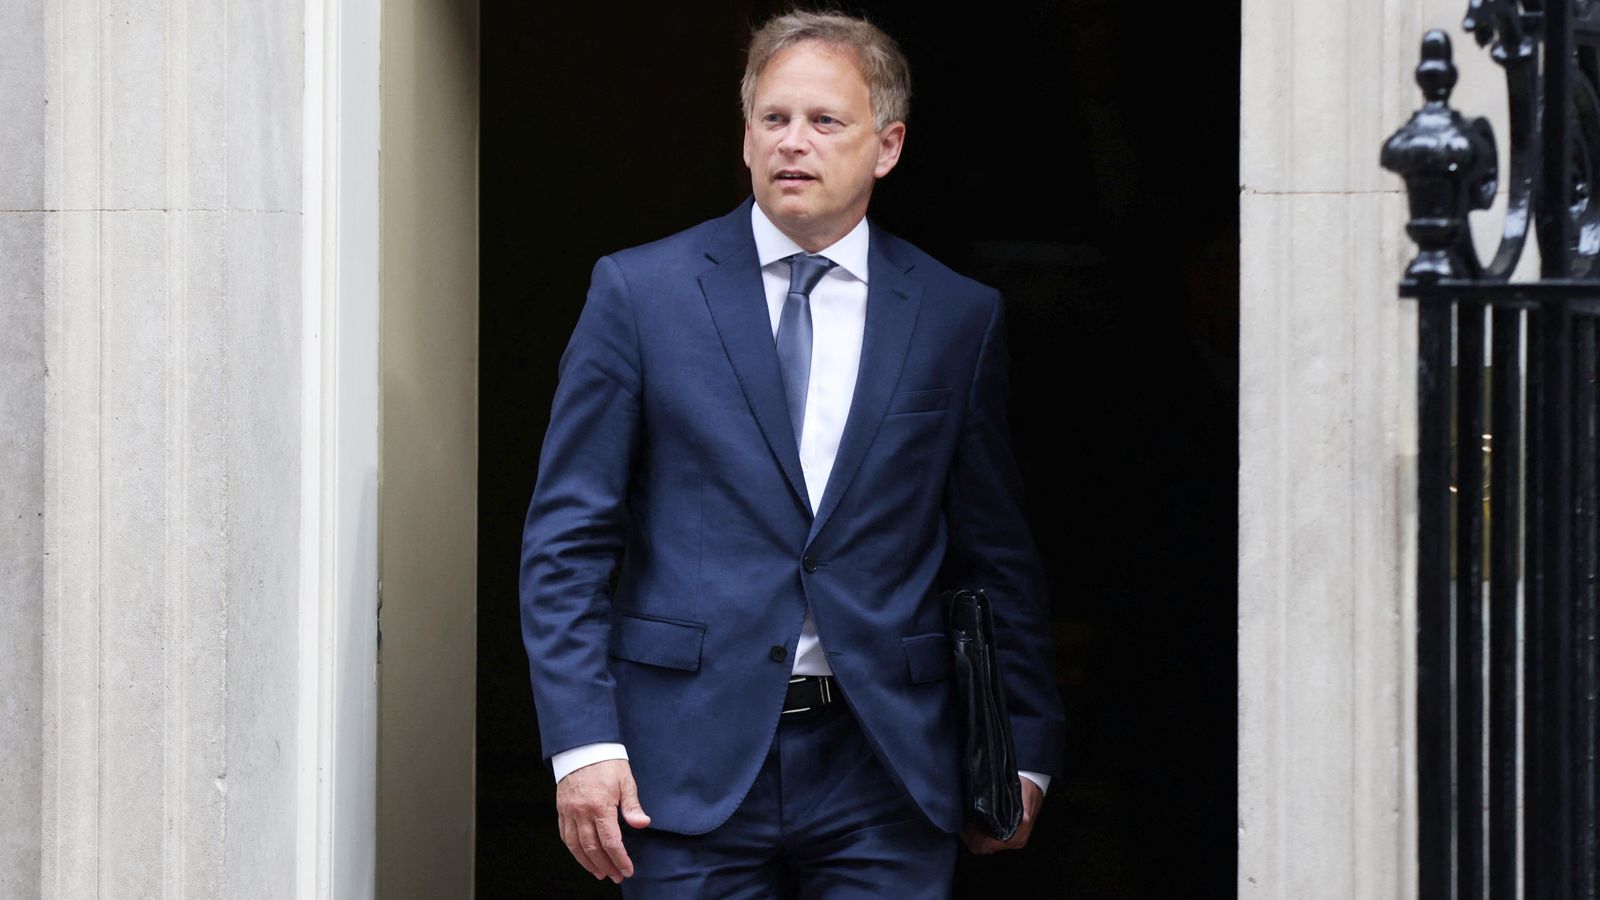 Grant Shapps appointed UK's new defence secretary, Downing Street says